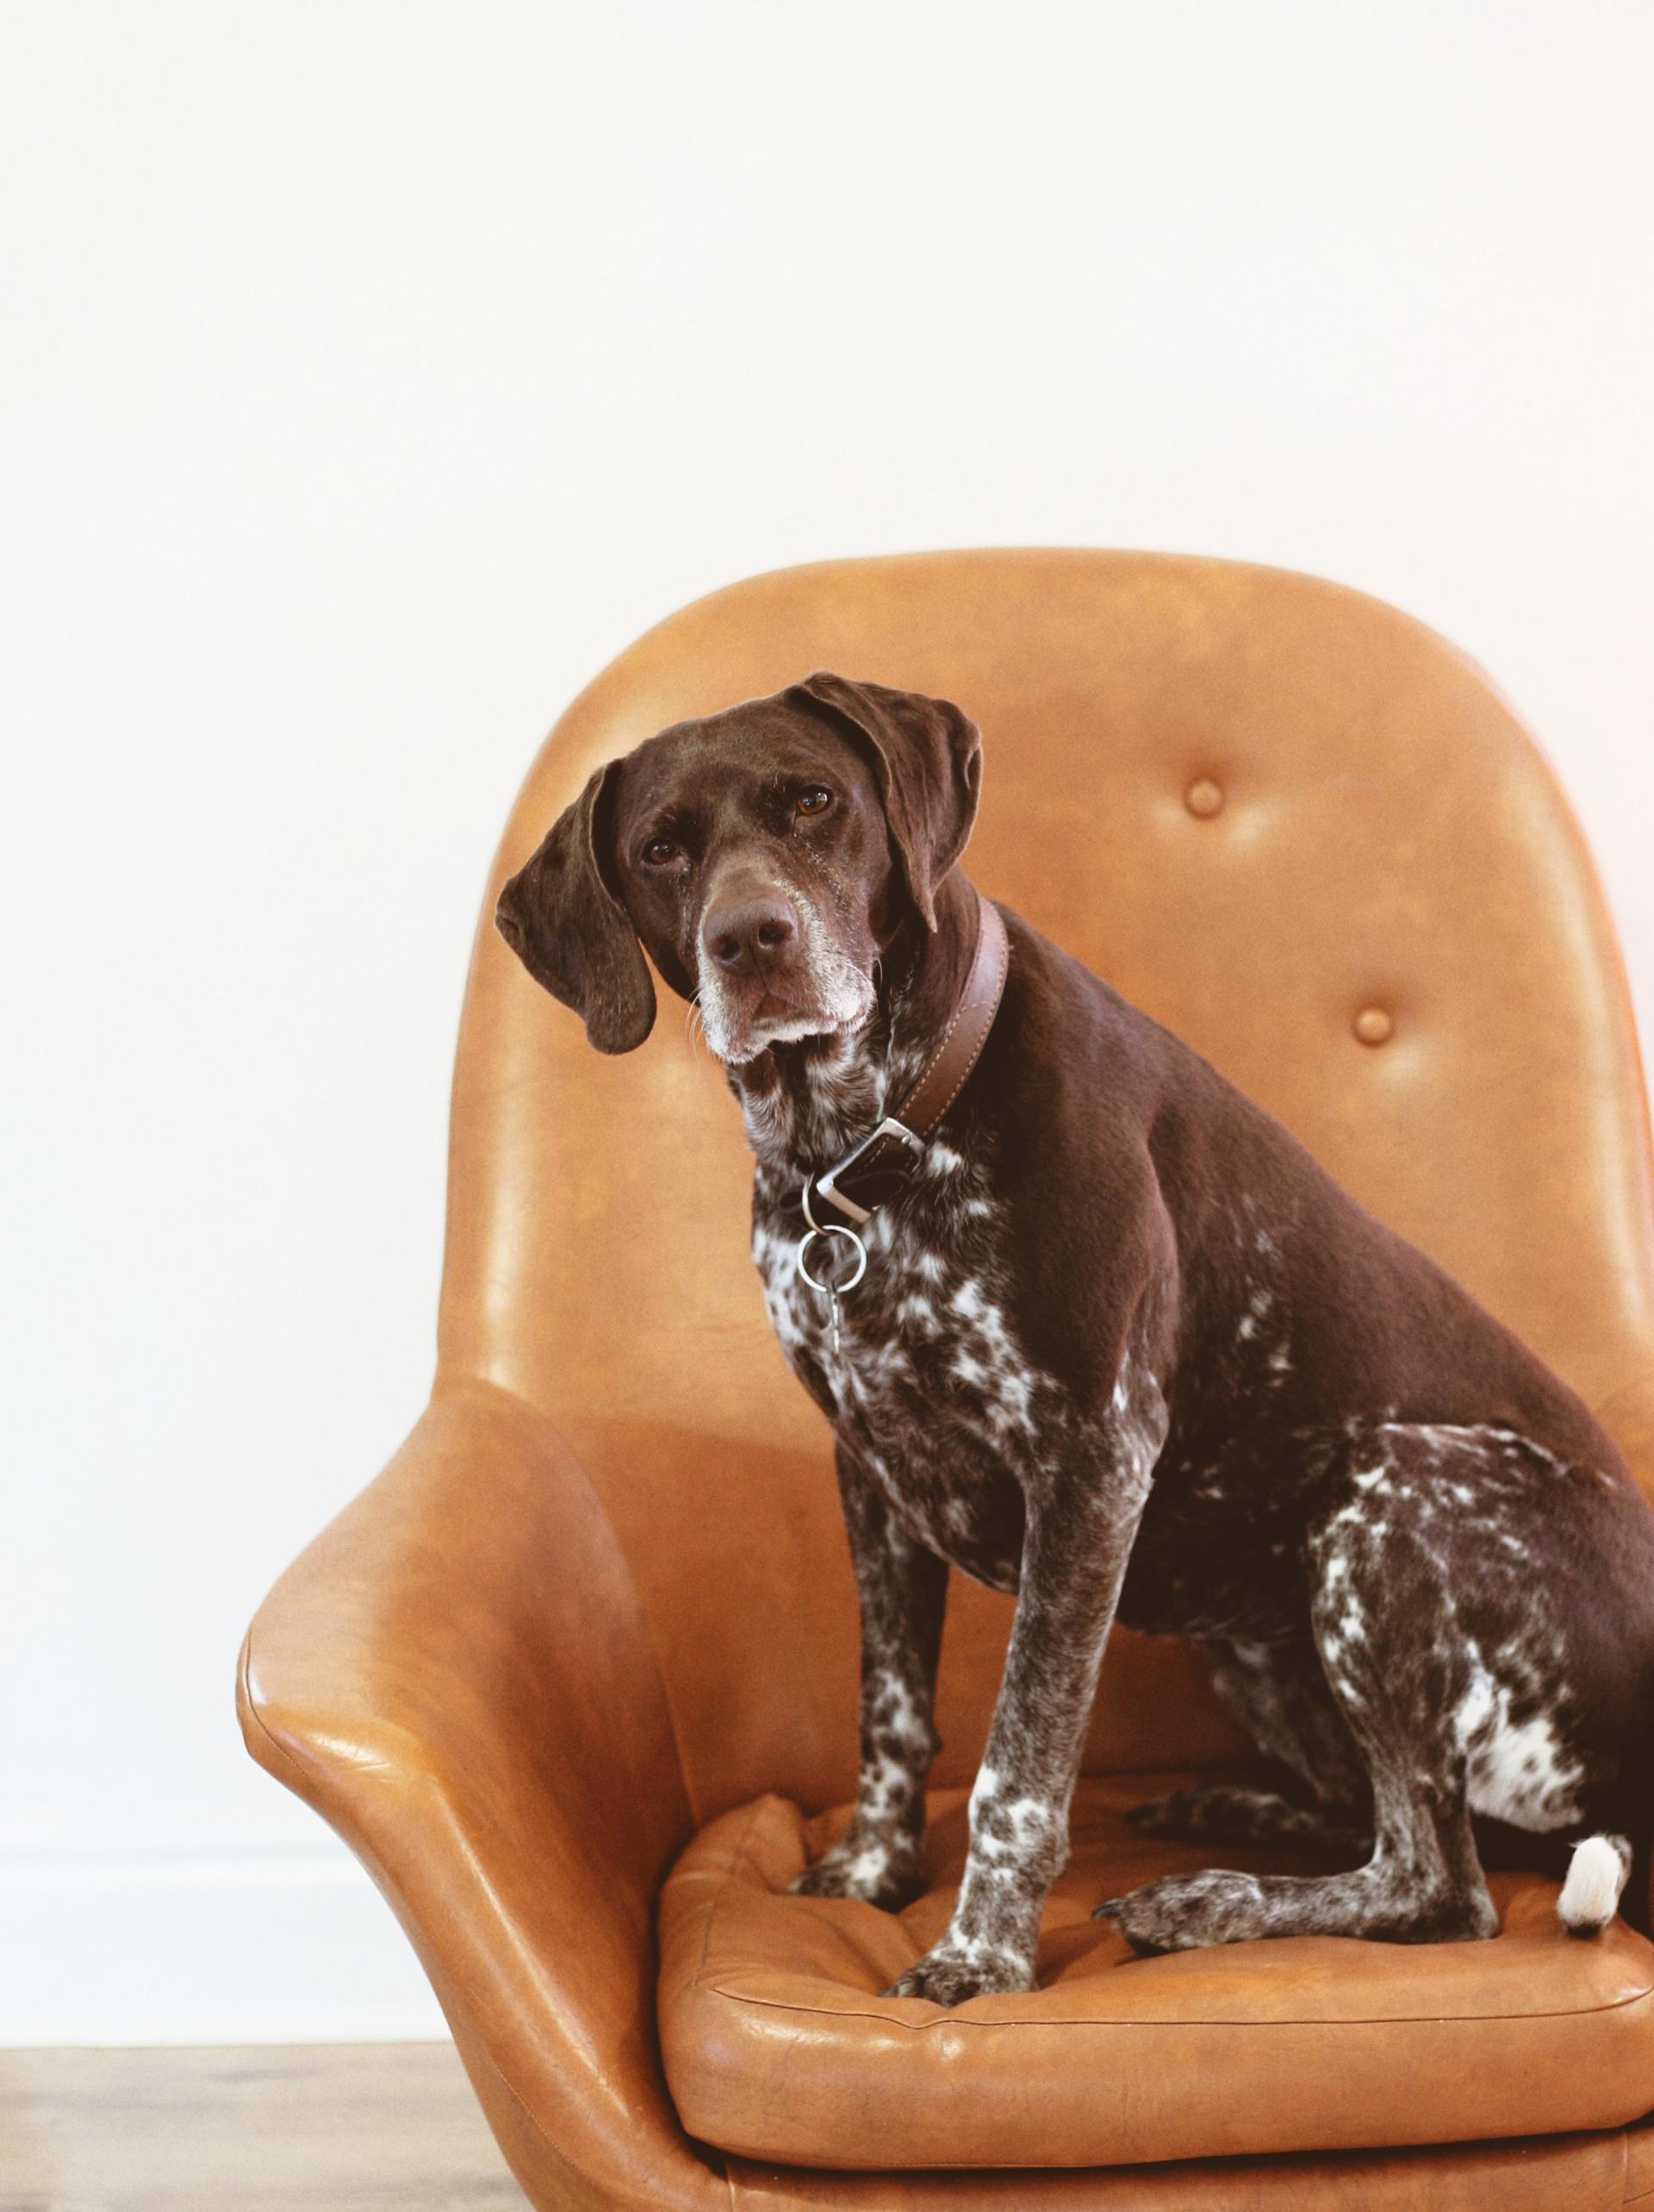 A dog on a brown arm chair